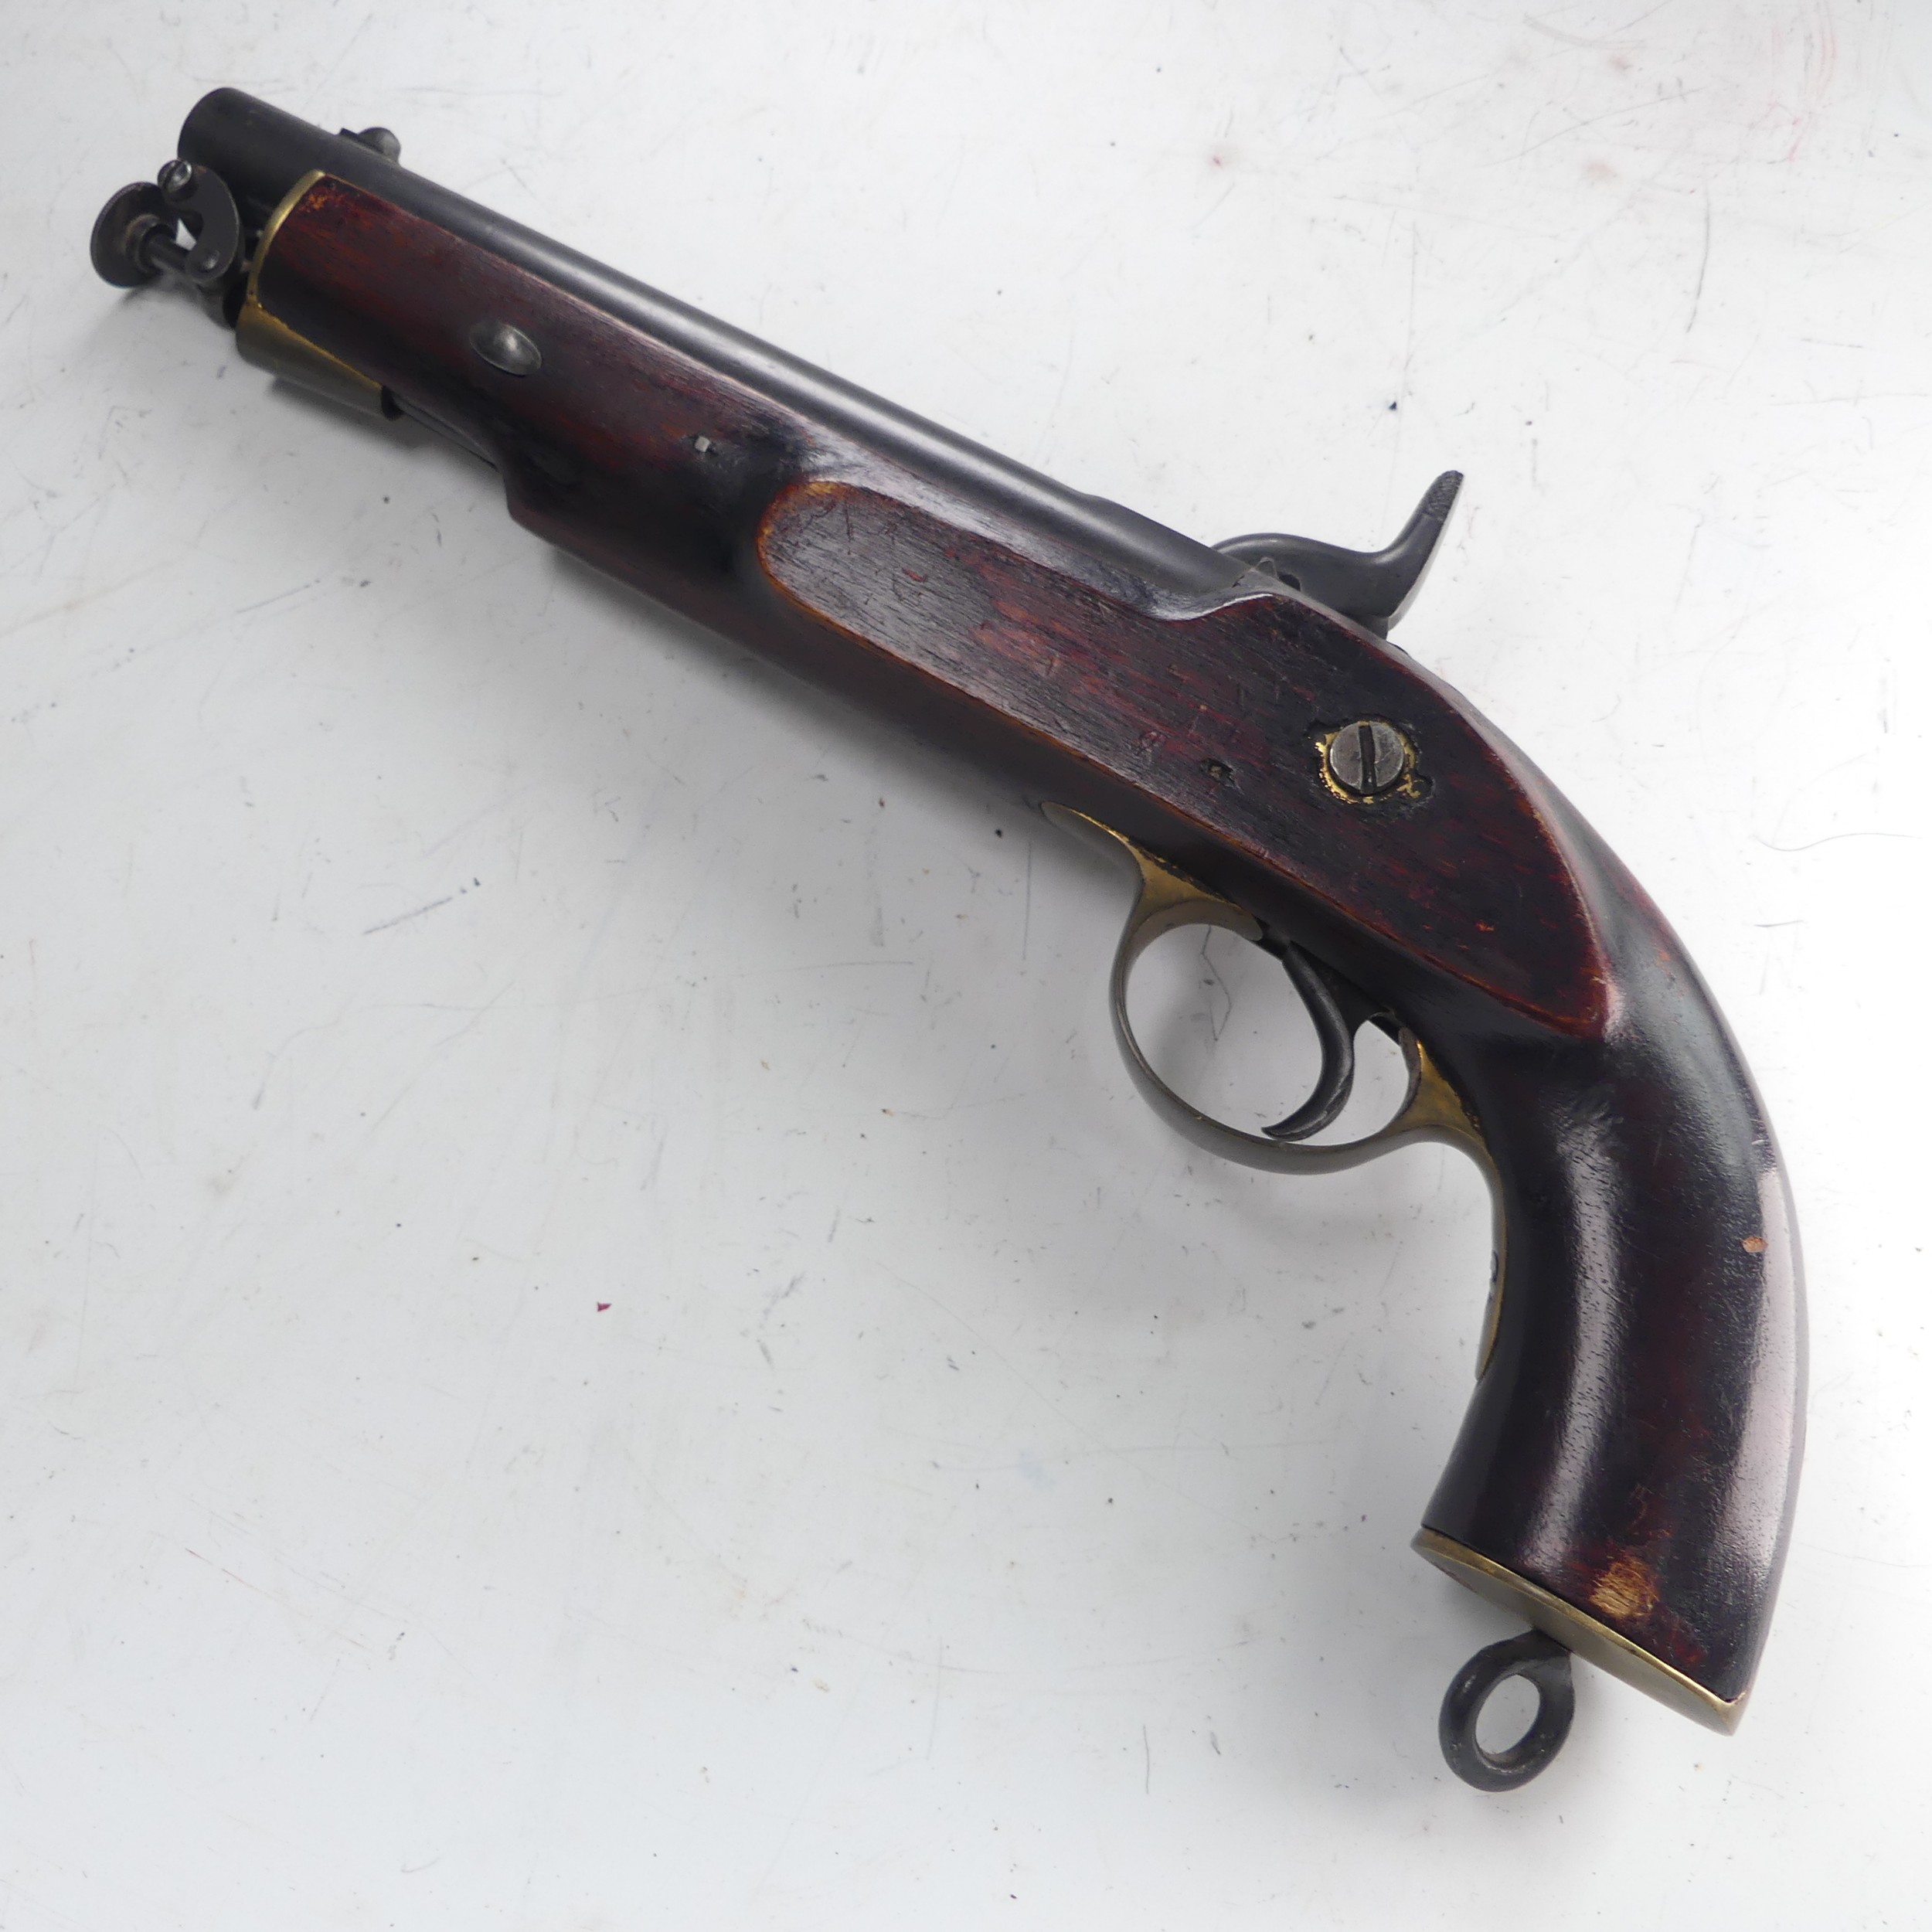 A 19th century 'Enfield' percussion cap service Pistol, with walnut stock, 8 inch steel barrel, - Image 7 of 7